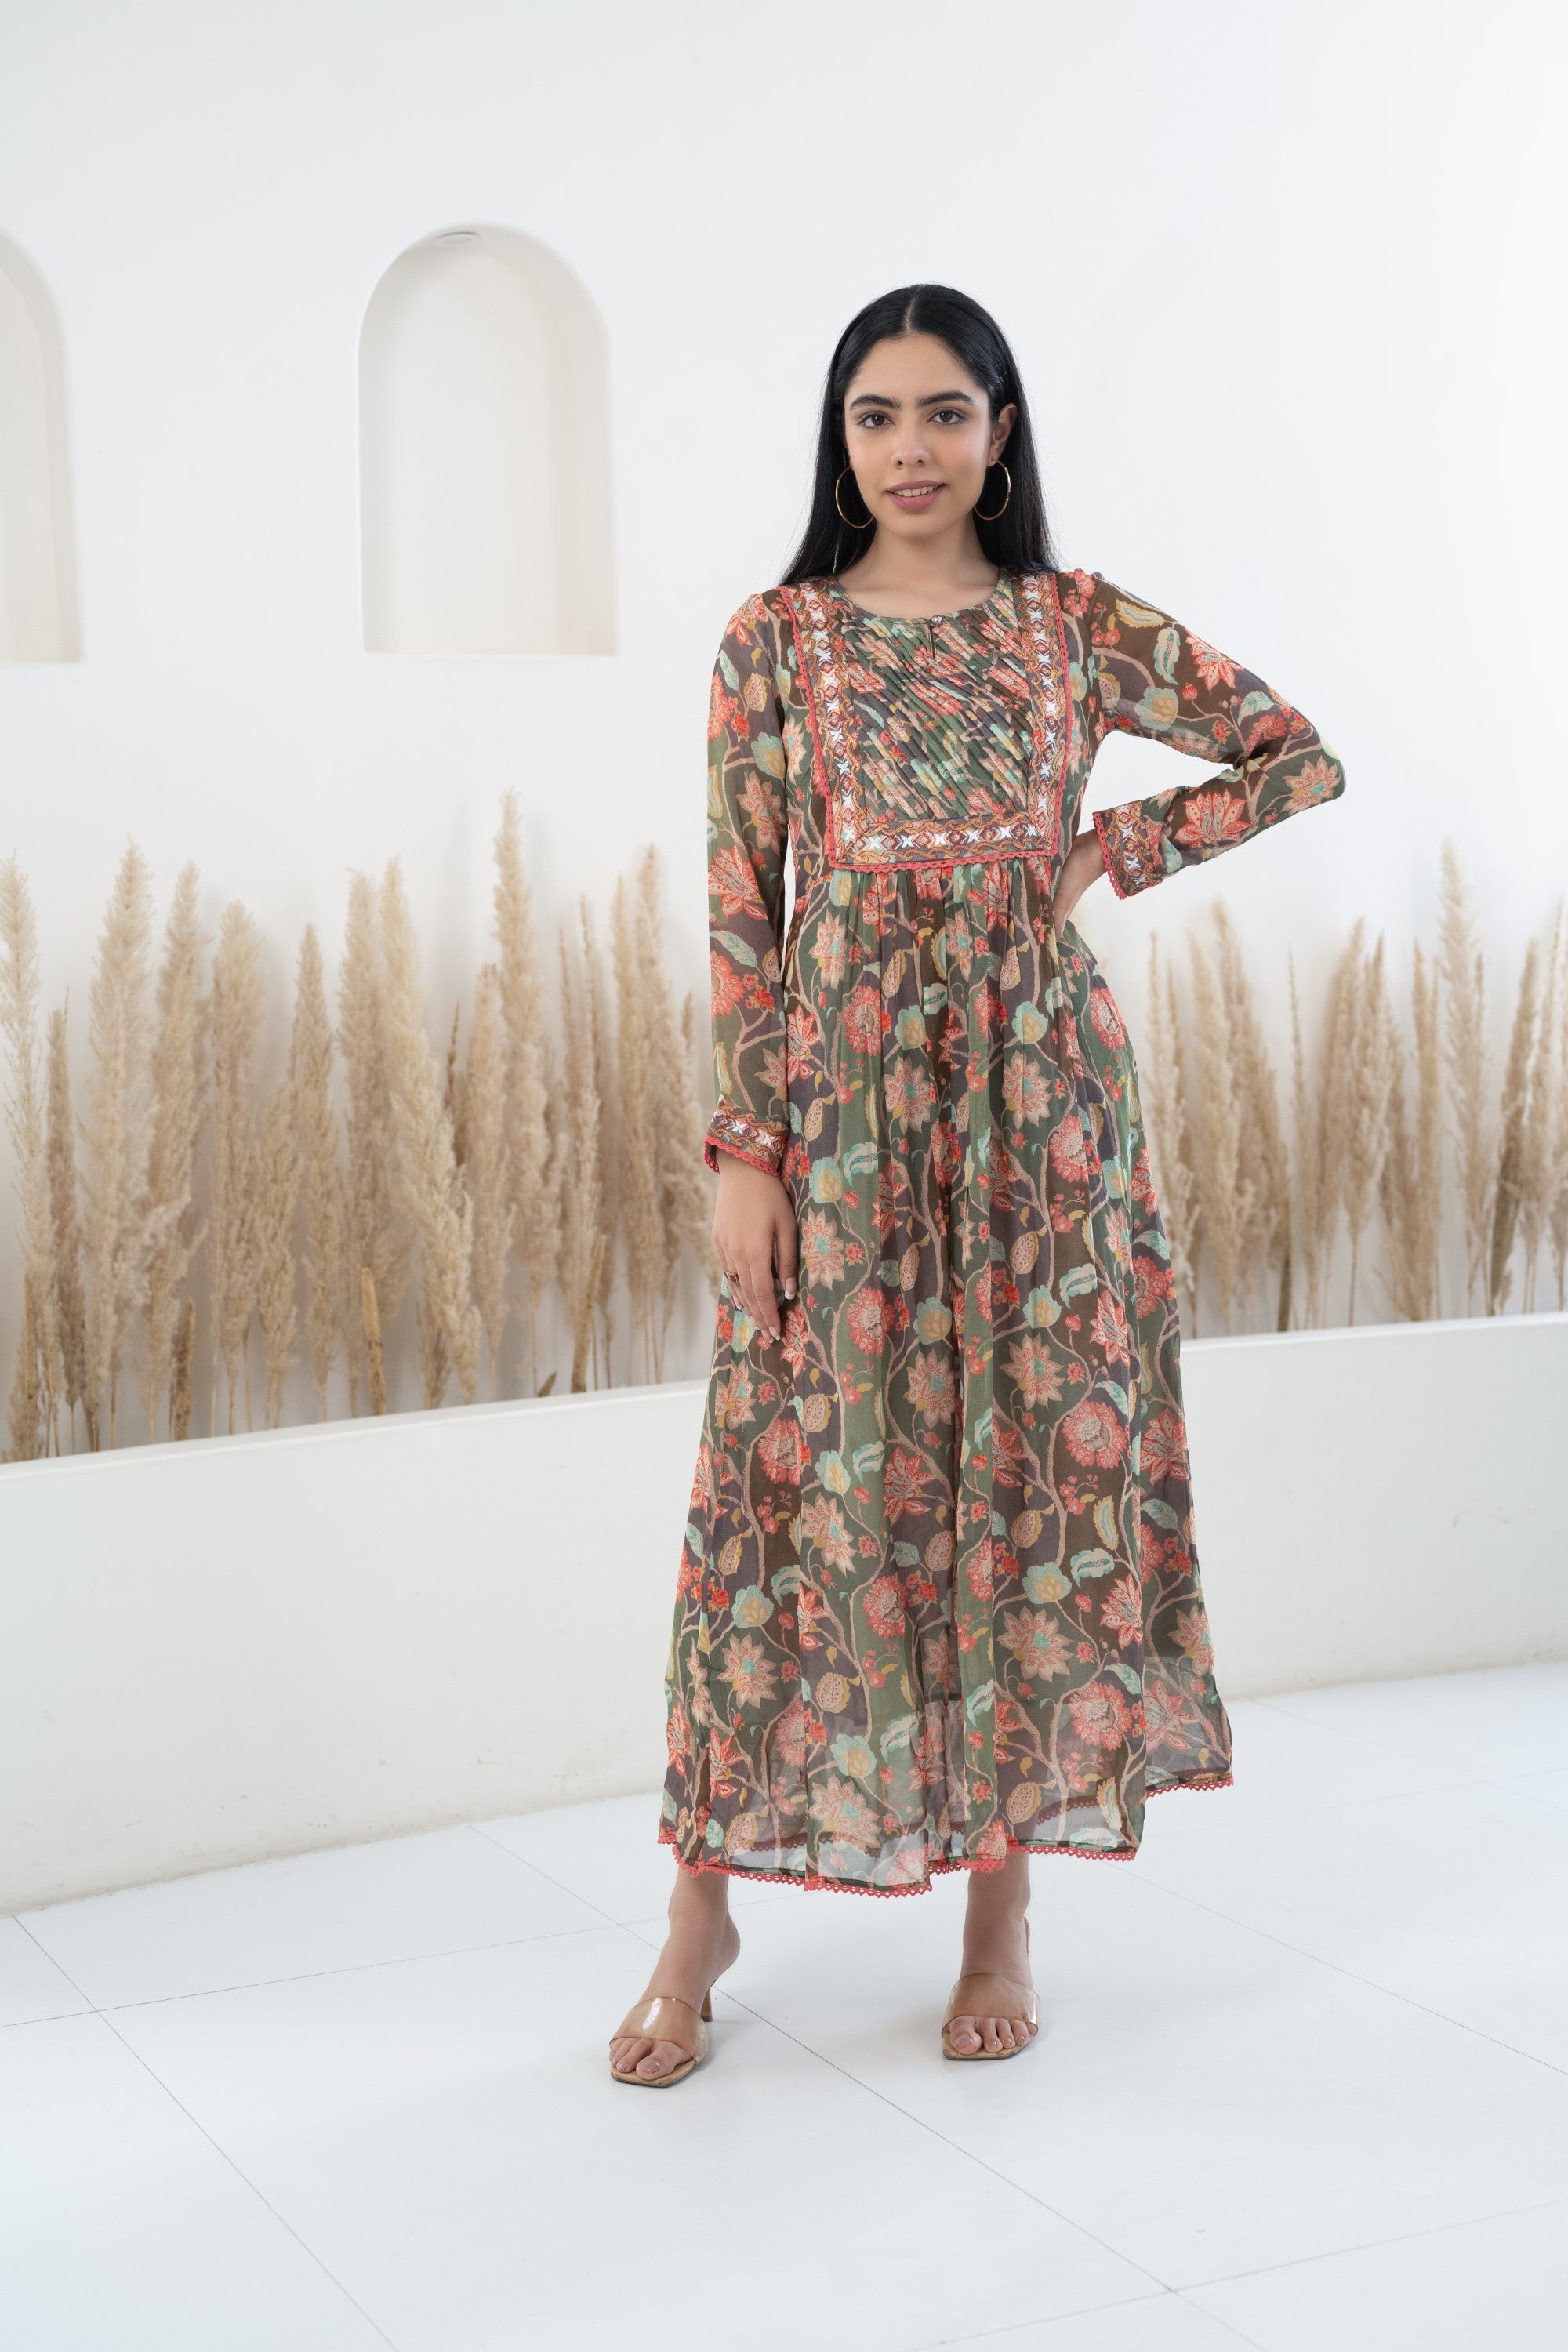 Women’s Floral Printed Traditional Dress by Myshka- 1 pc set